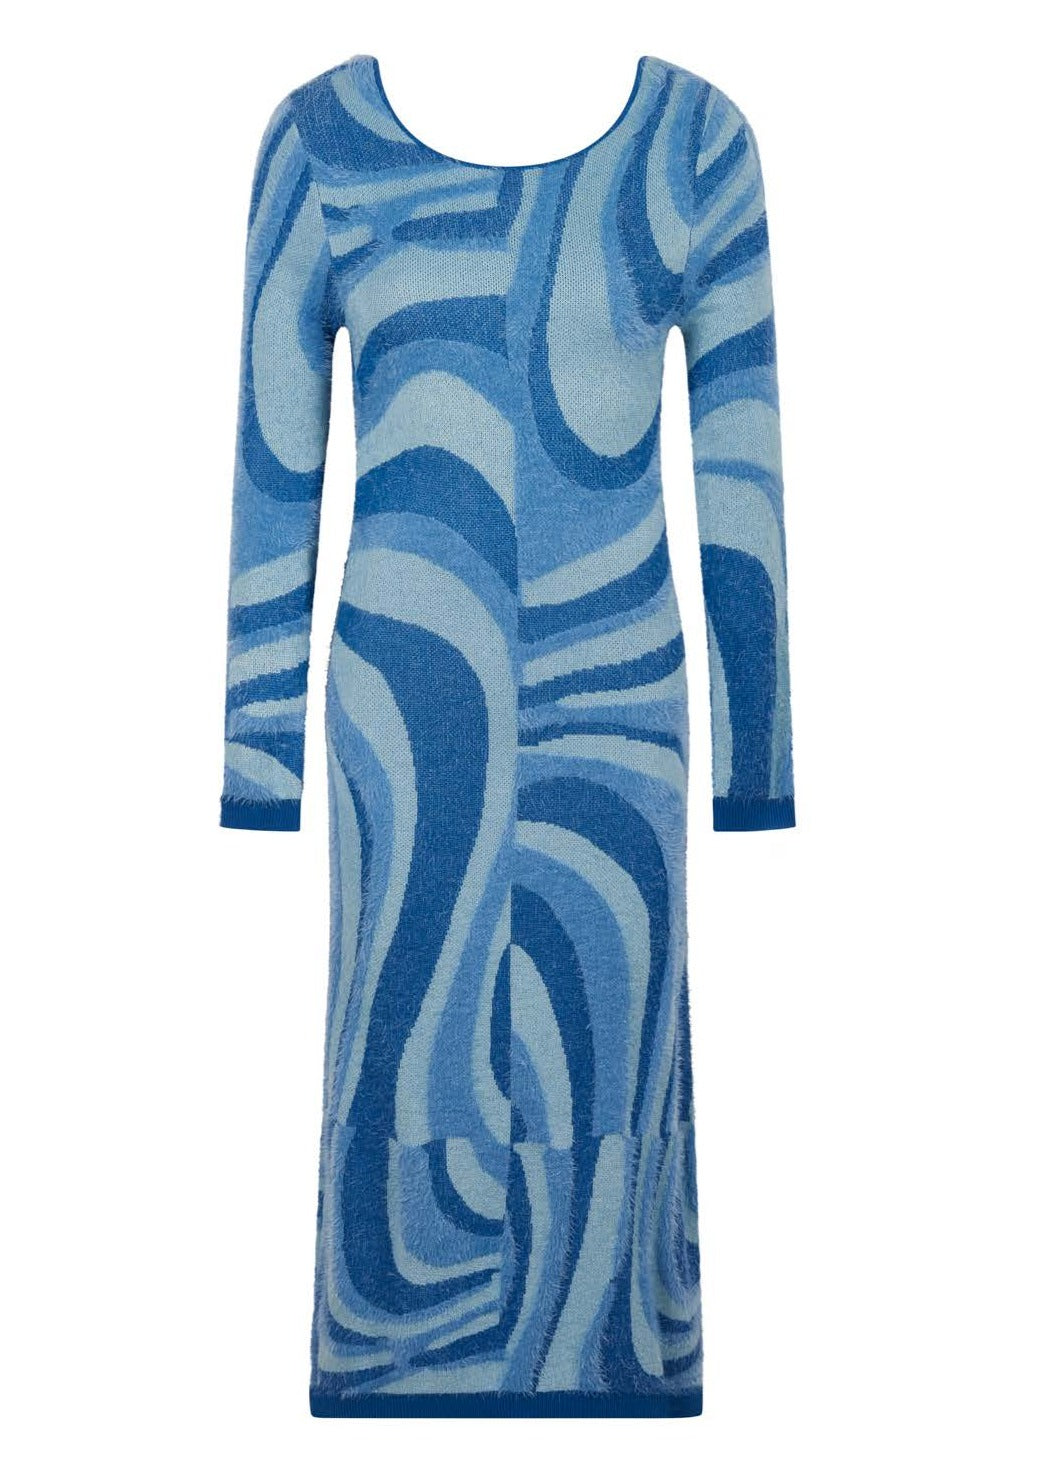 Blue knitted slip dress with long sleeves from the brand House Of Sunny